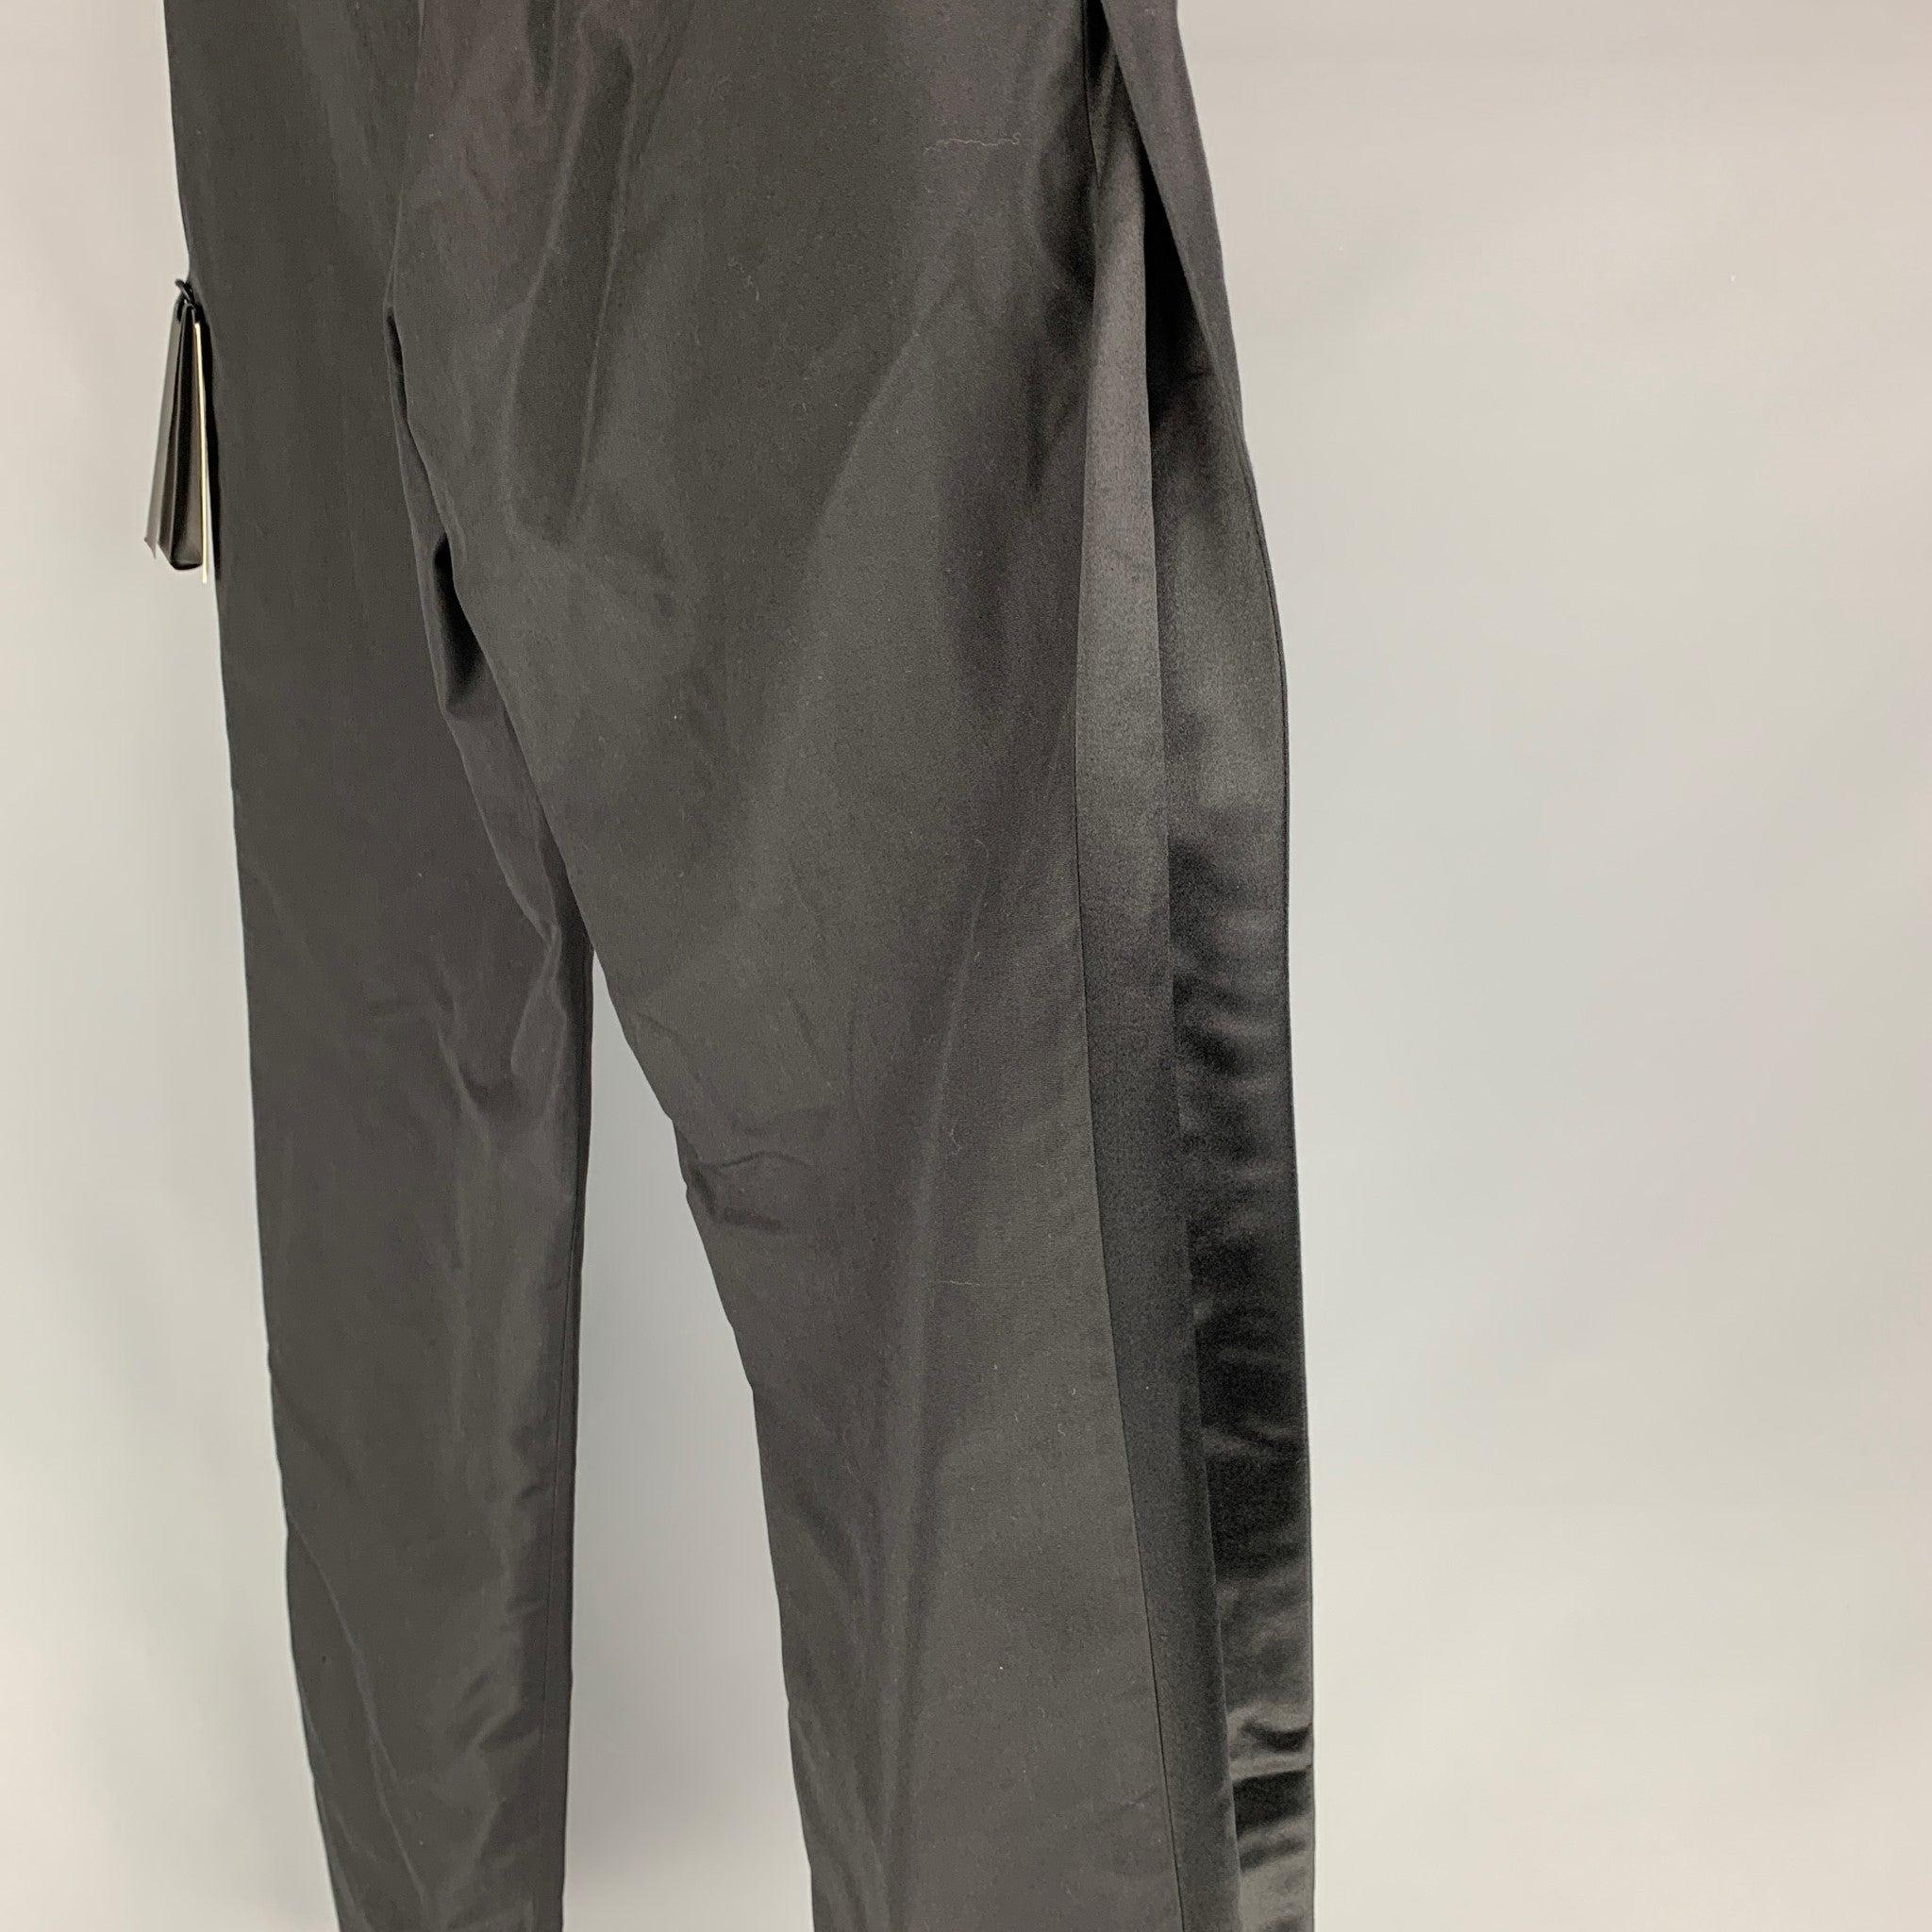 JEAN PAUL GAULTIER Size 34 Black Solid Silk Zip Up Dress Pants In Excellent Condition For Sale In San Francisco, CA